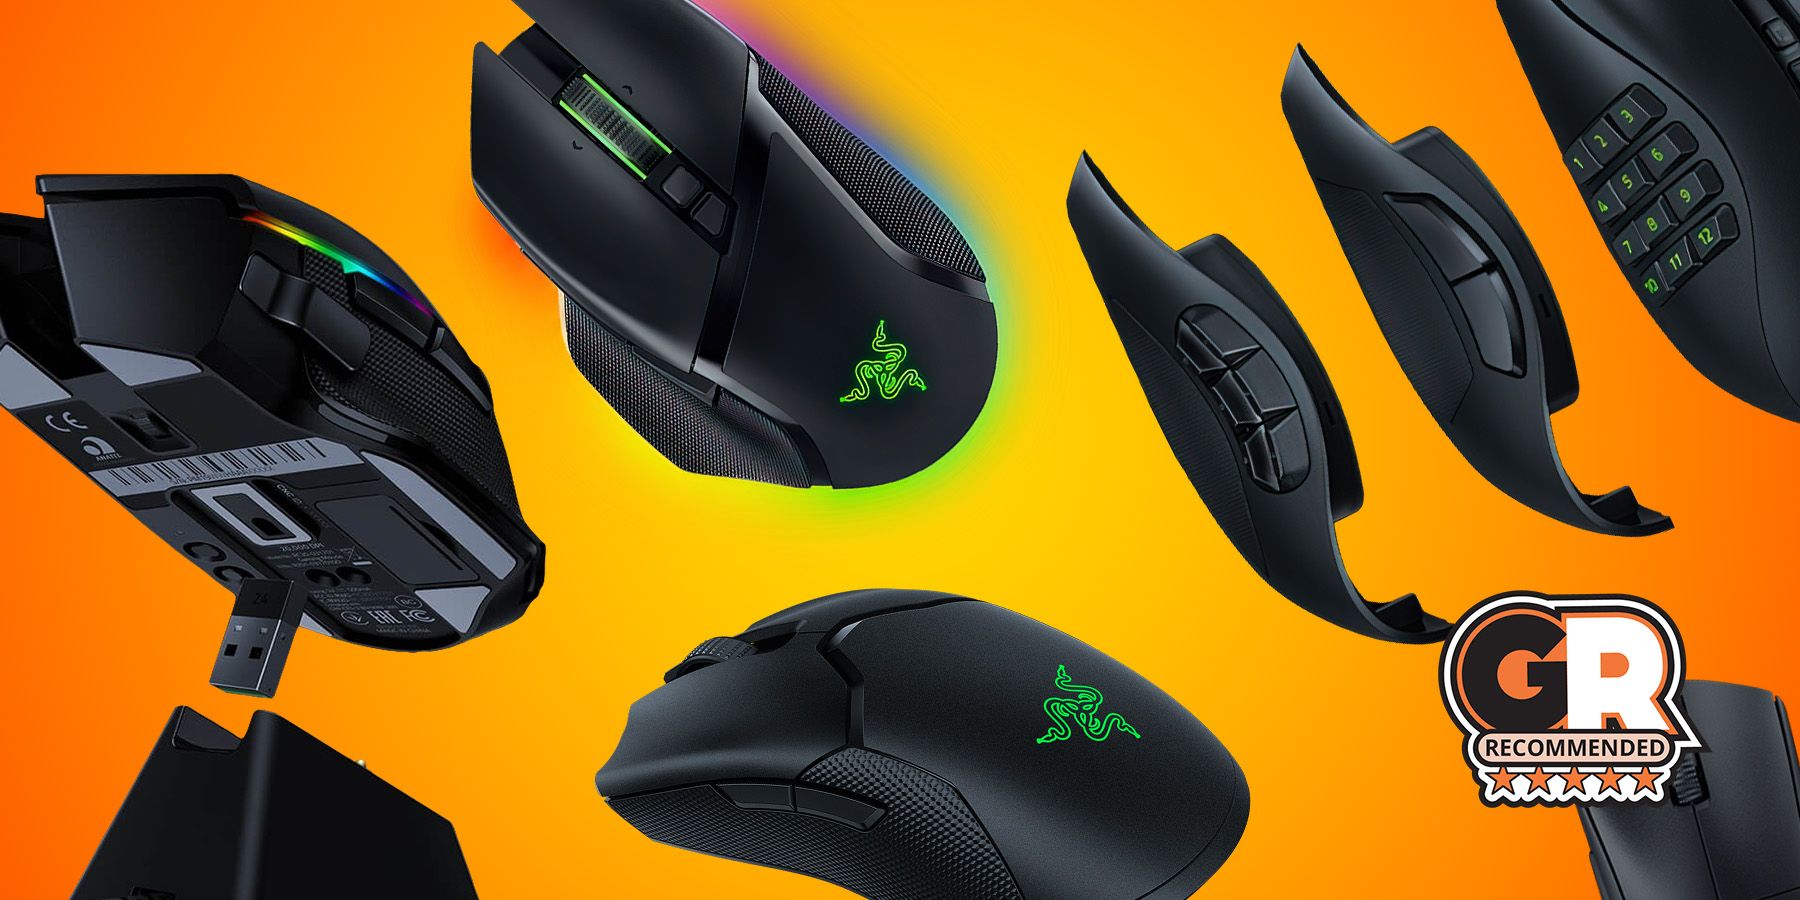 Razer Orochi V2 gaming mouse refreshed with new Pokémon Editions -   News